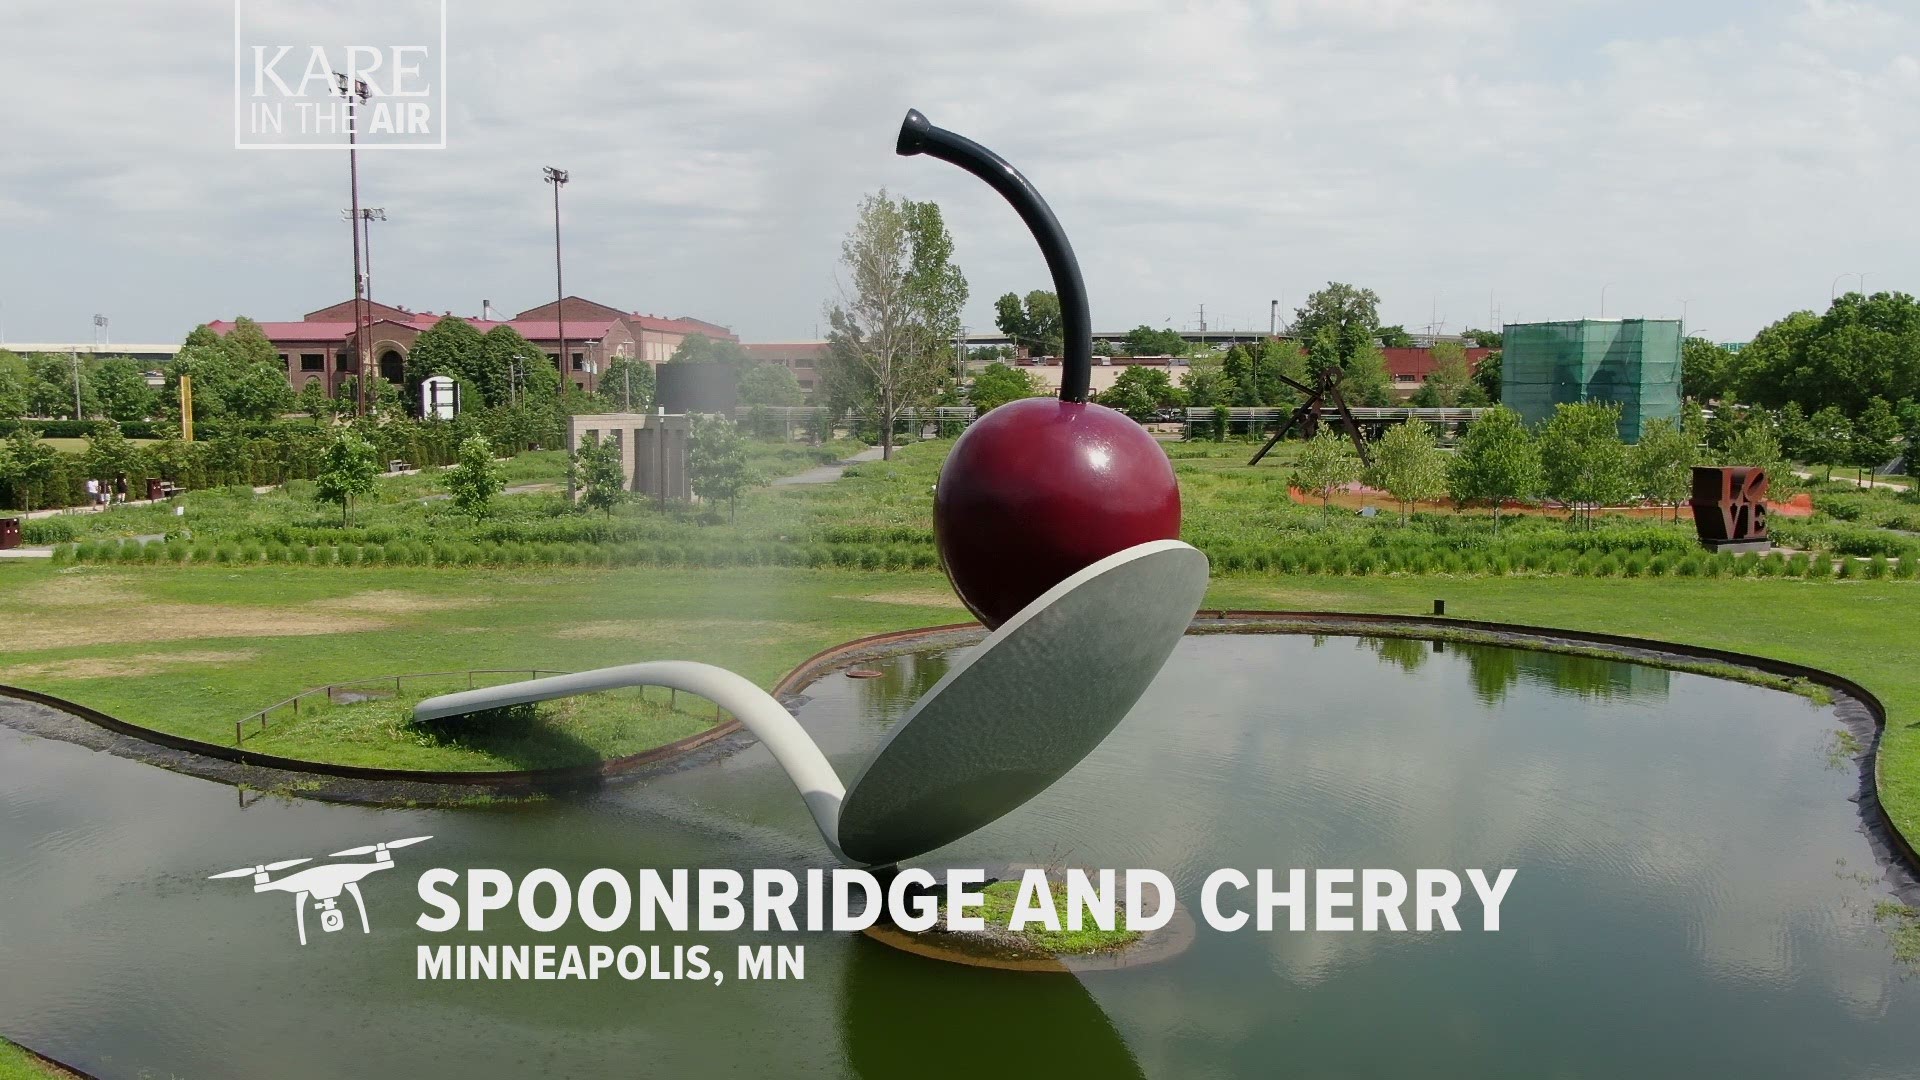 The latest installment of our summer drone series takes us over a piece of pop culture so iconic it immediately shouts "Minneapolis!" to people across the globe.